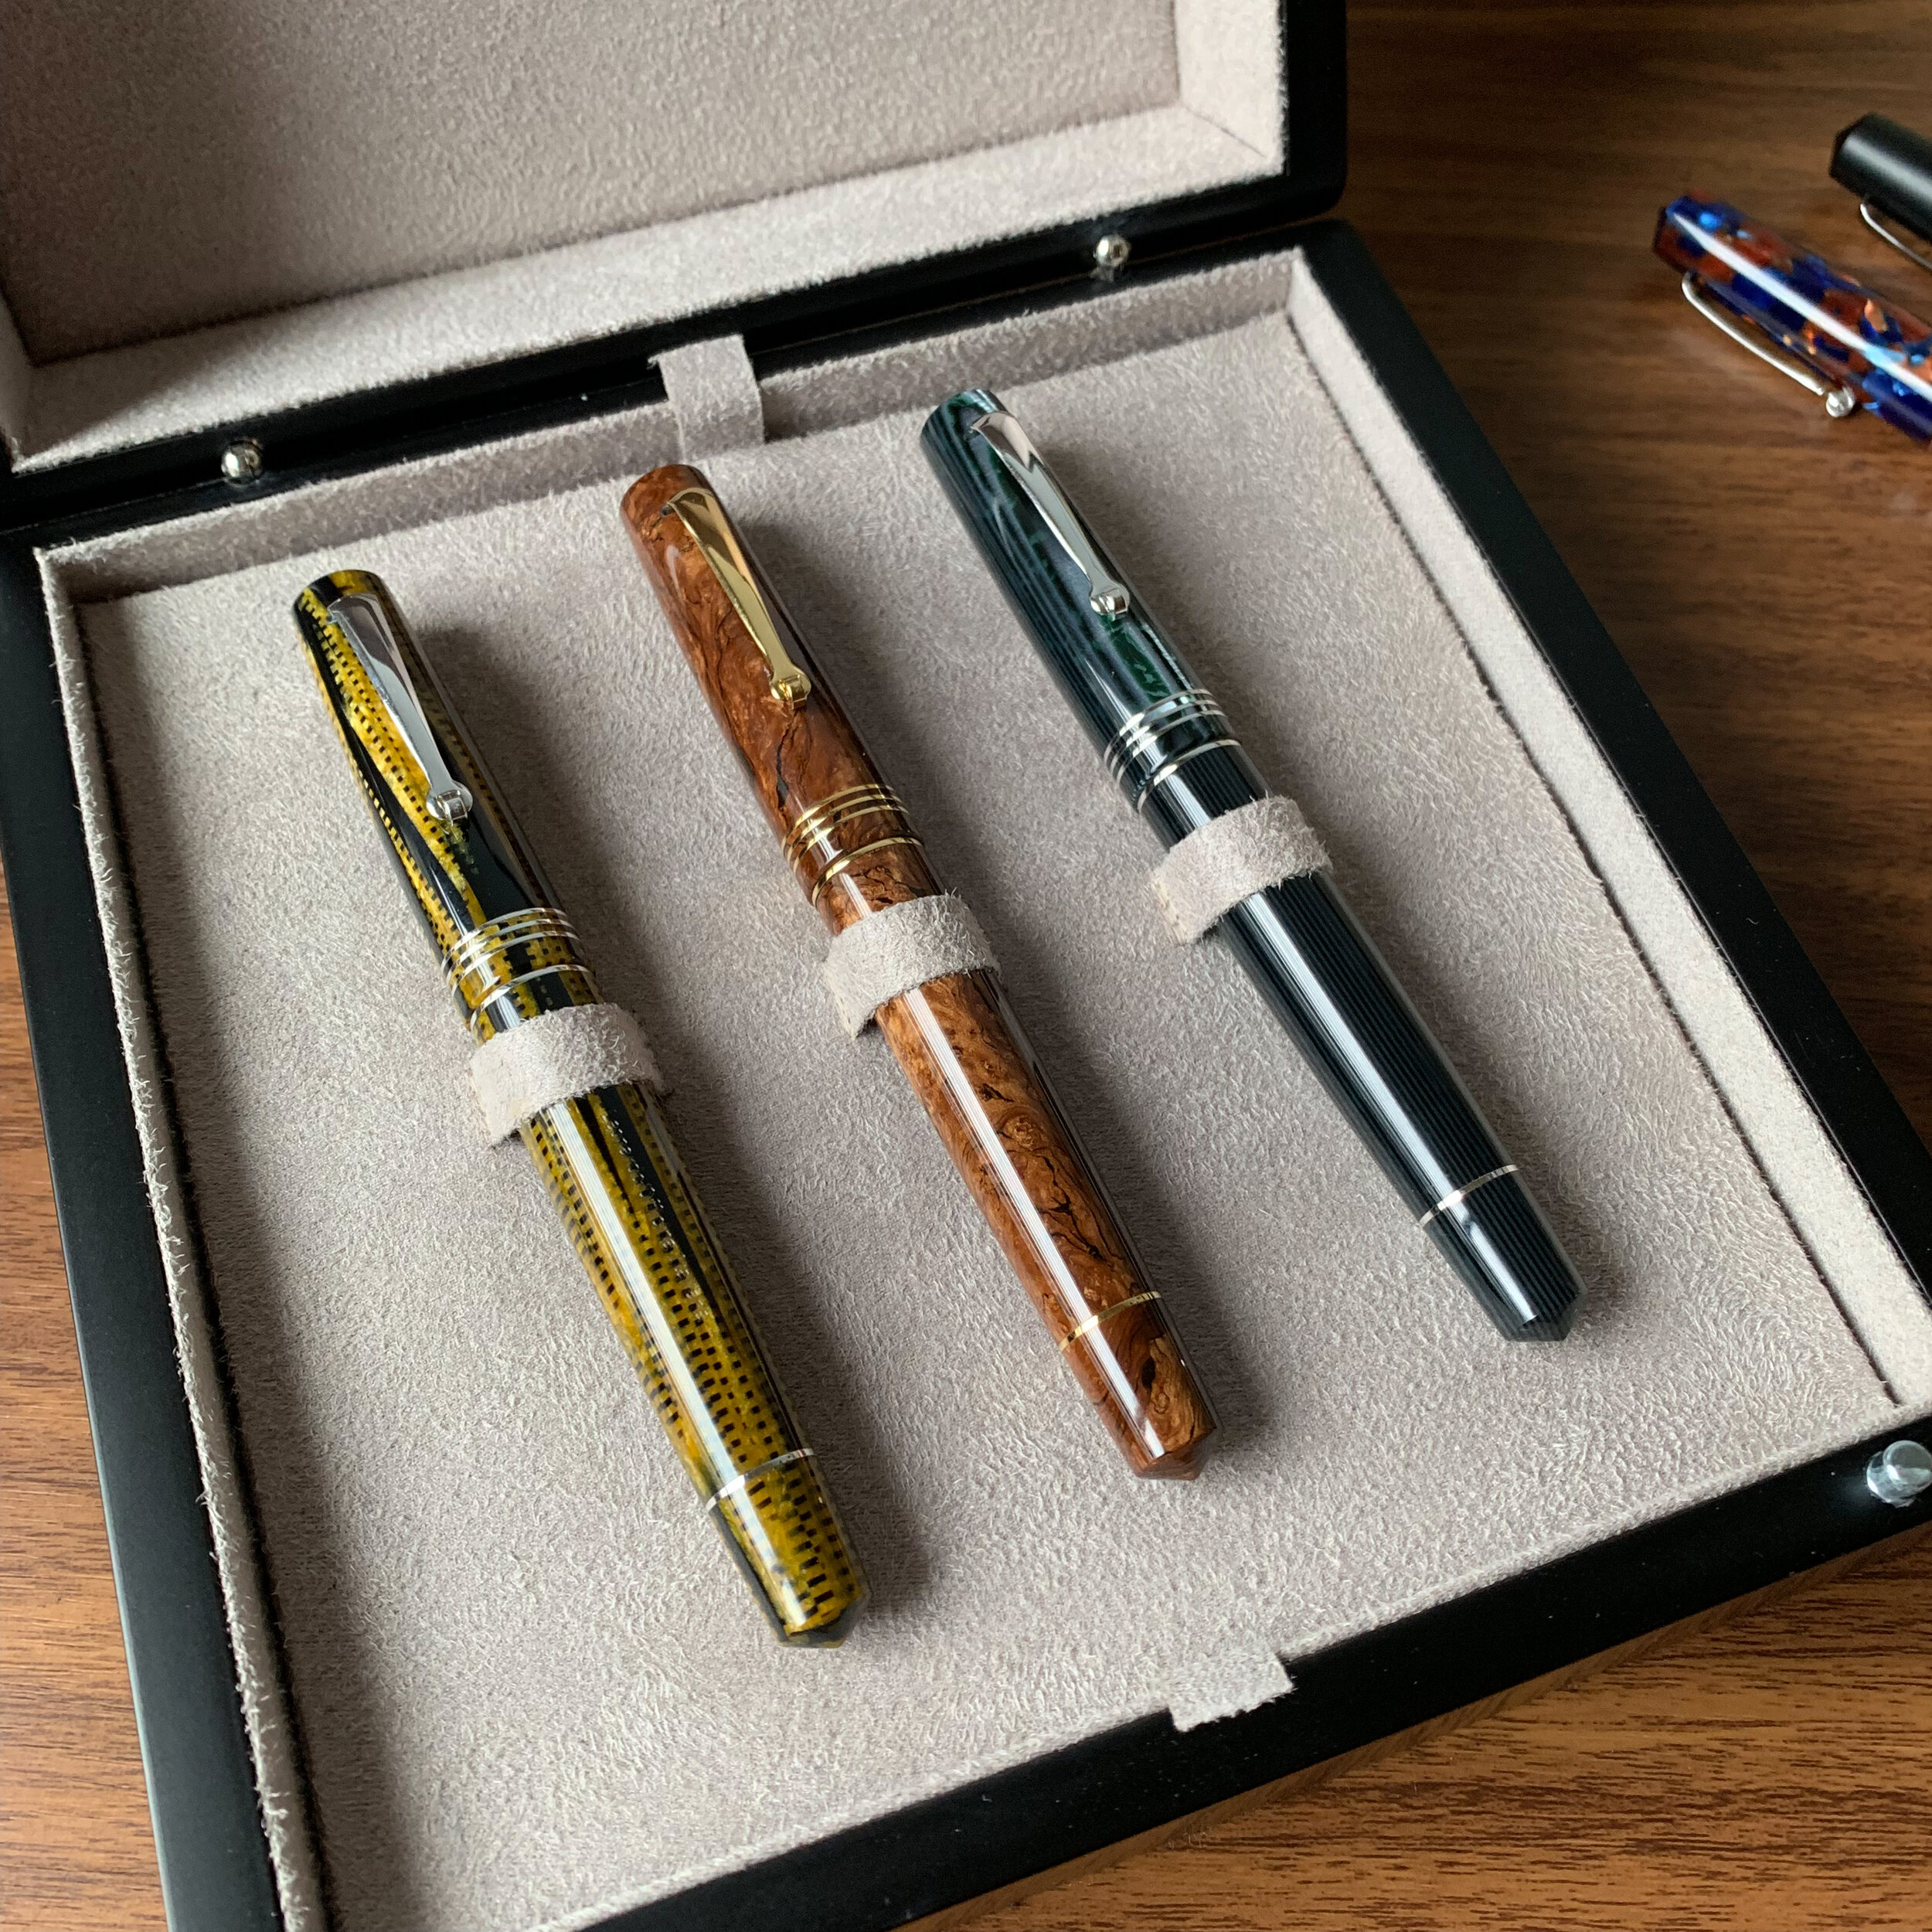 Are there any fountain pens you would not recommend? I like all